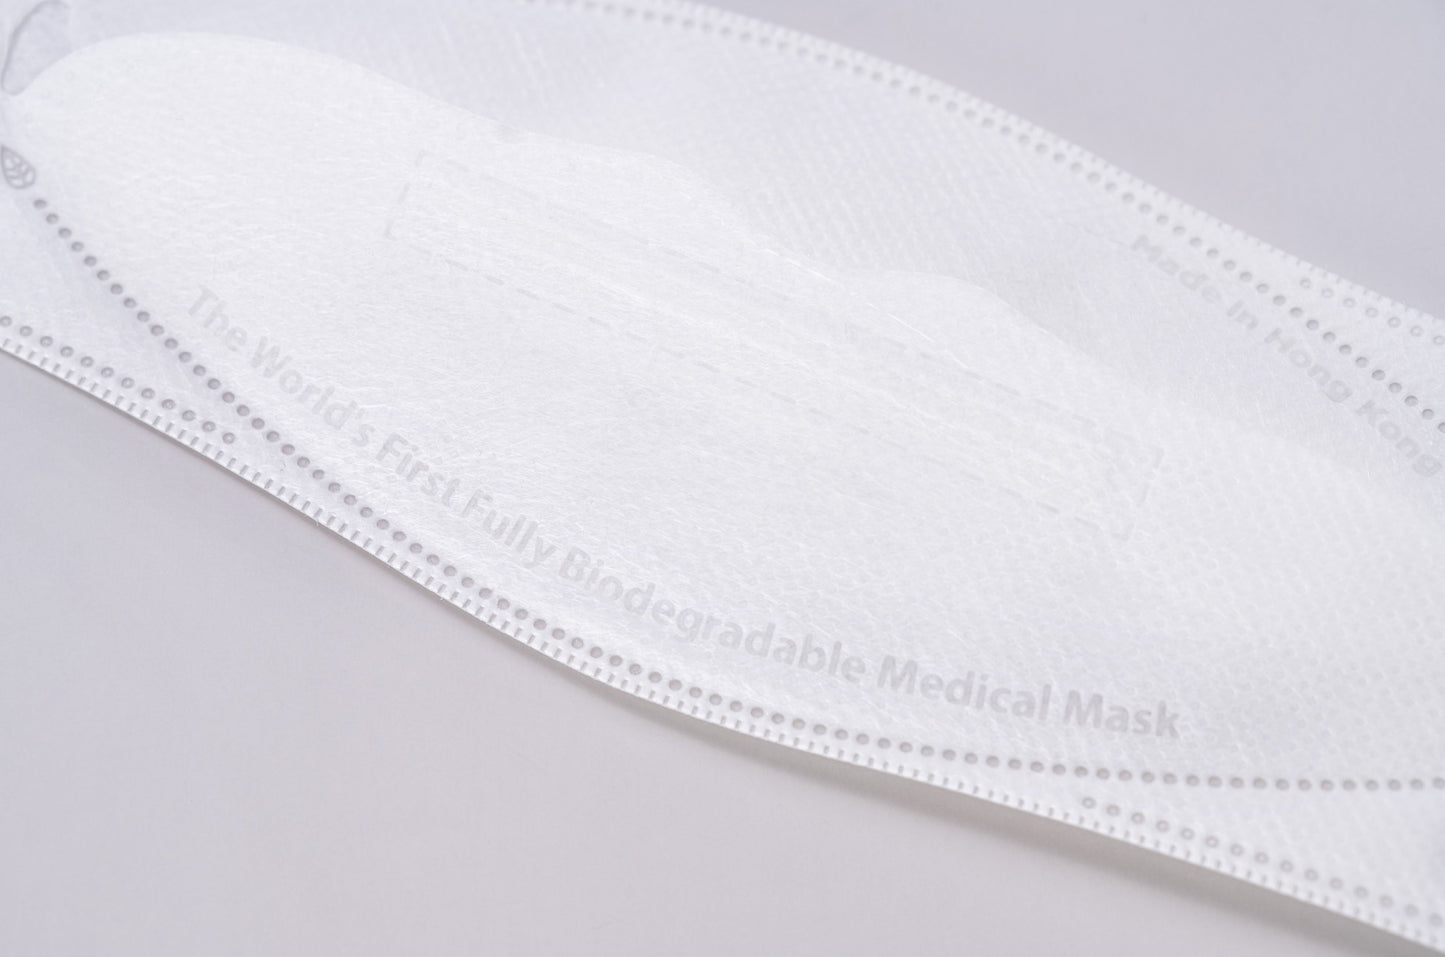 ÖKOSIX® Fully Biodegradable Level 3 Surgical Mask - Adult M - White - 36 pieces per box